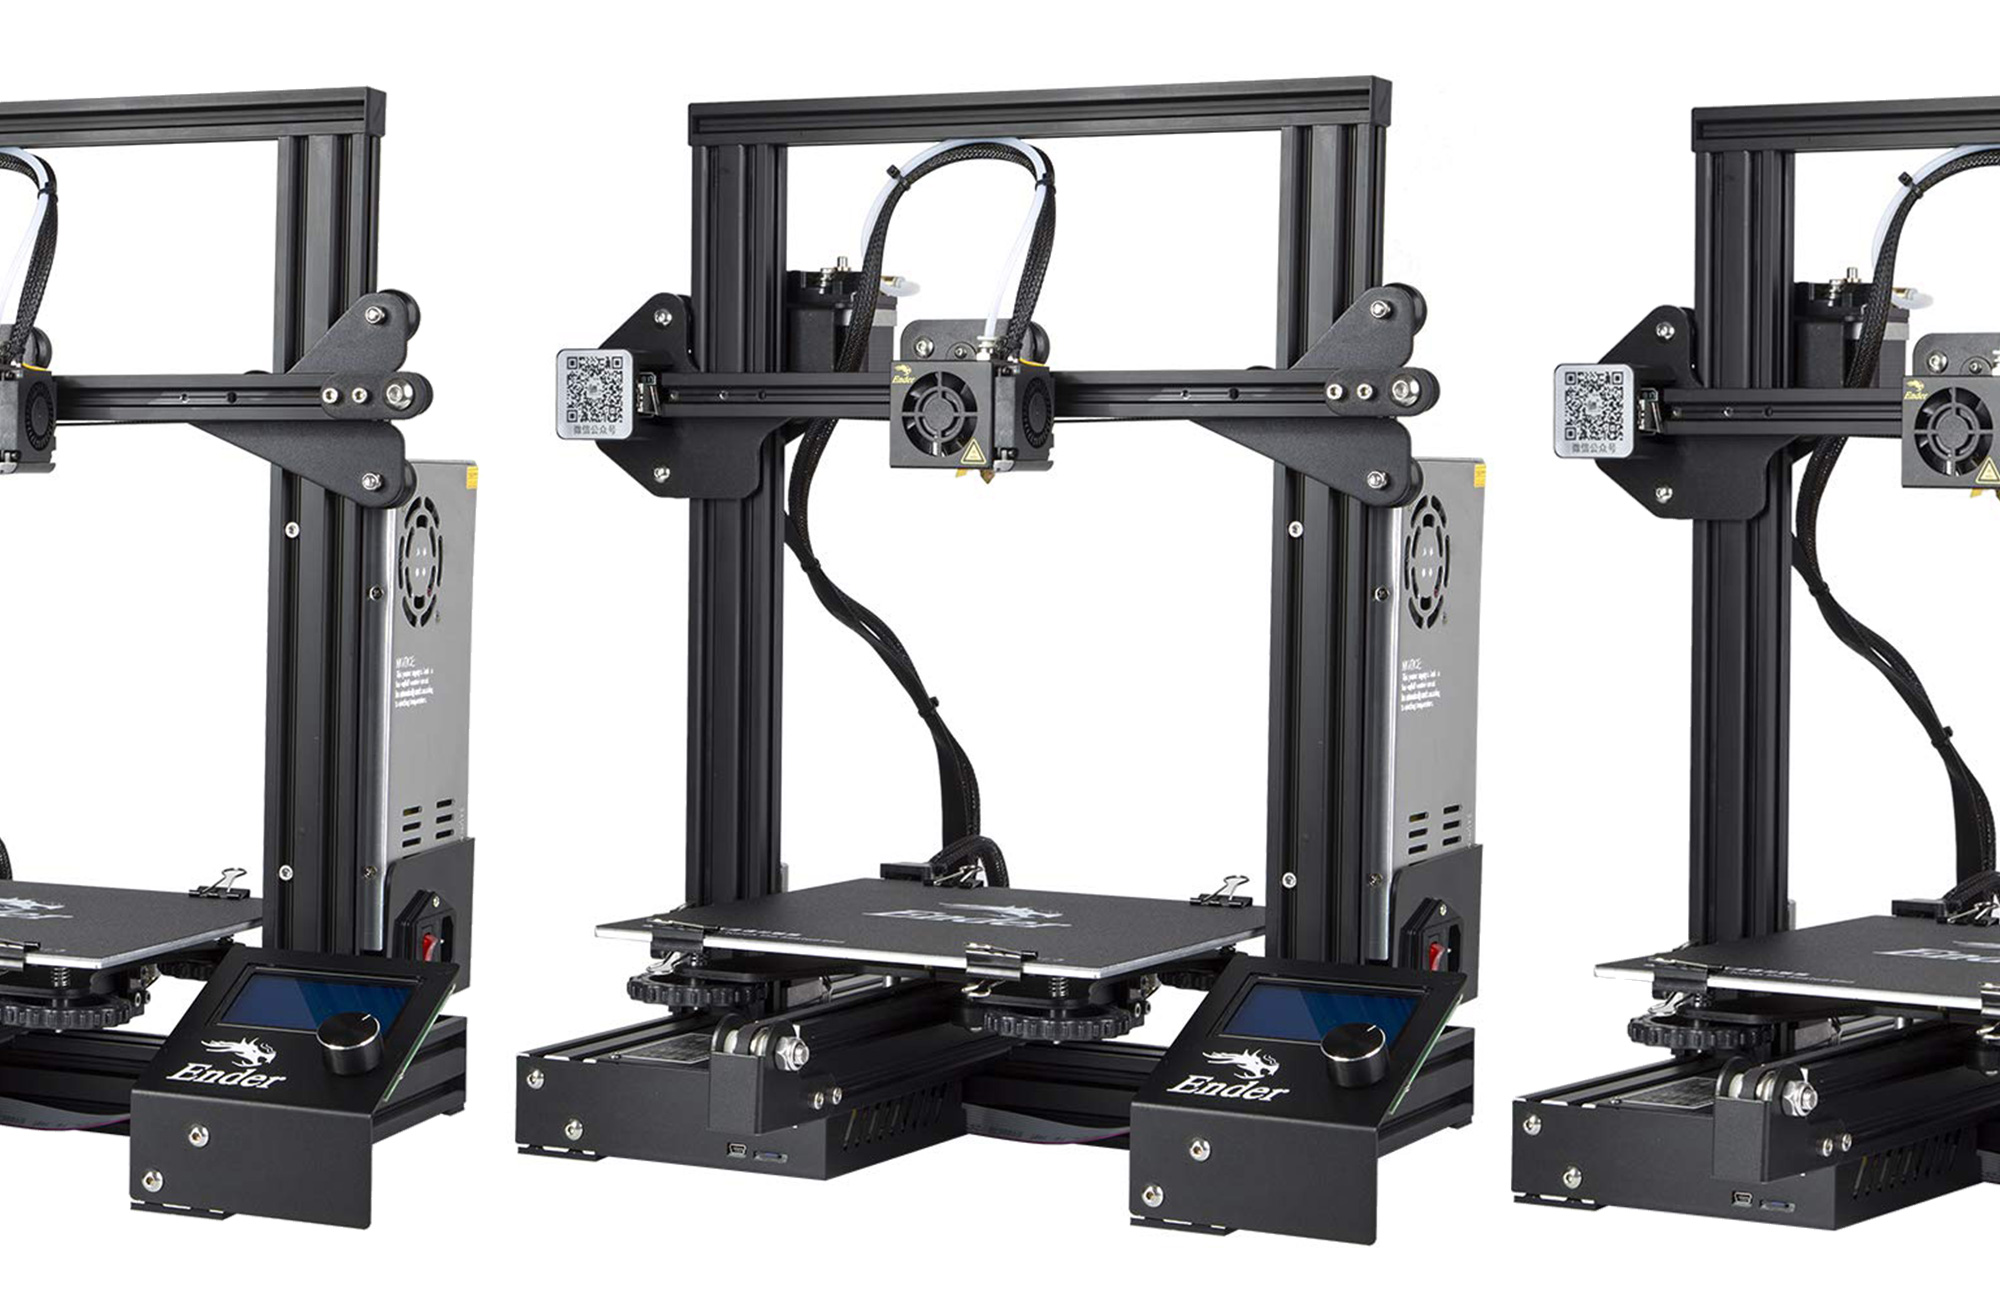 Save $90 on Creality’s open-source 3D printer today at Amazon